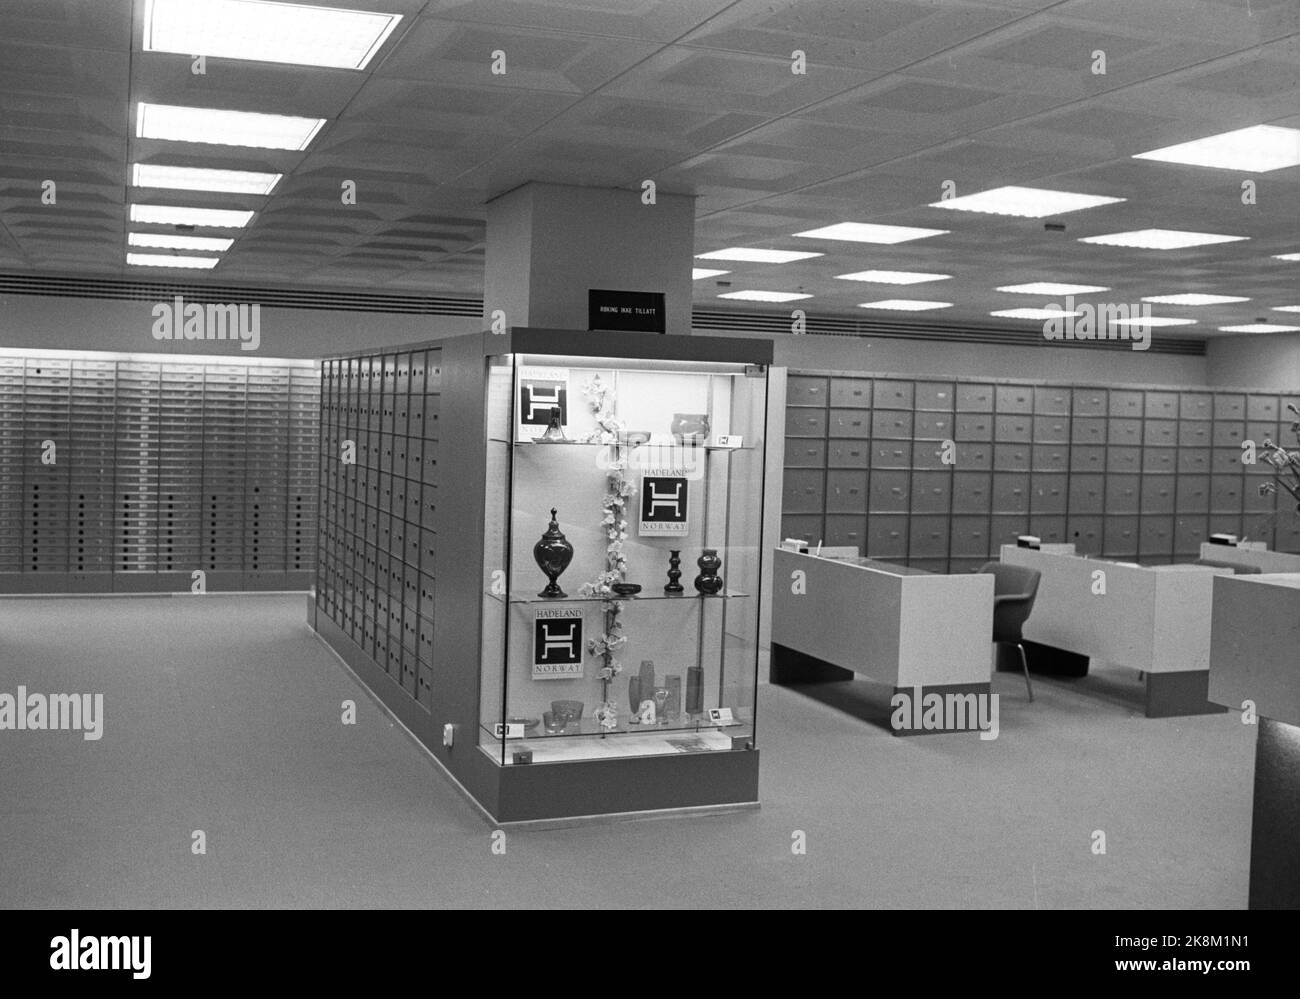 Oslo, 19710909. Interior motif from the Kreditkassen building on Stortorgets west side. Bank boxes, desks for customers and a vetrine cabinet. 'Smoking prohibited' signs over the mount. Photo: Henrik Laurvik / NTB Stock Photo